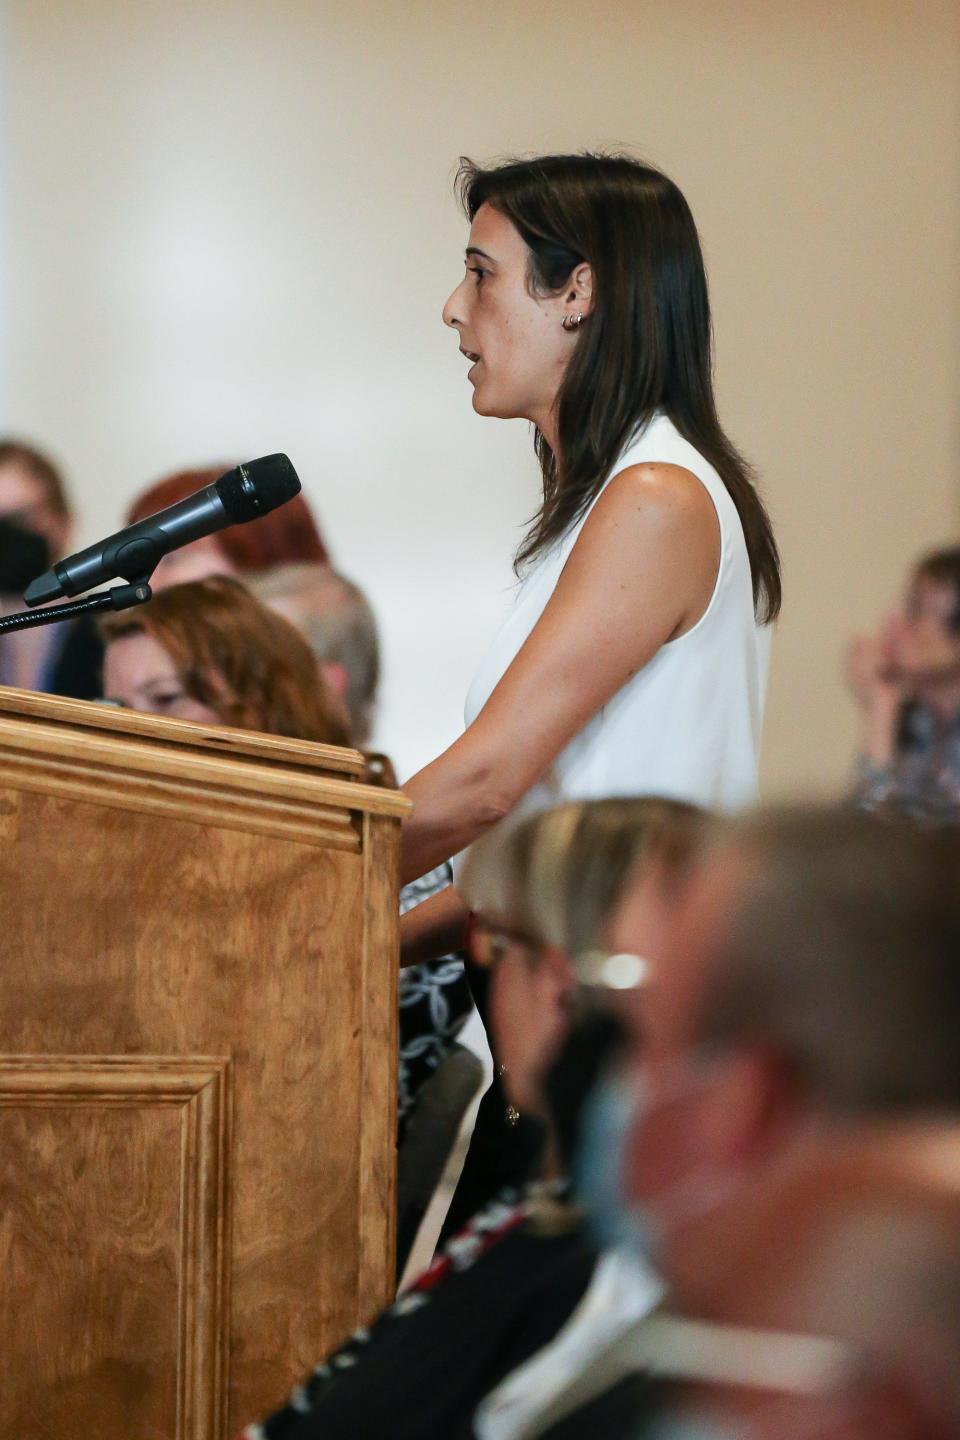 Dr. Ana Espila Navarro explains how vital MetroWest Medical Center's oncology services are to the community during the state Department of Public Health public hearing at Nevins Hall in Framingham, July 6, 2022.